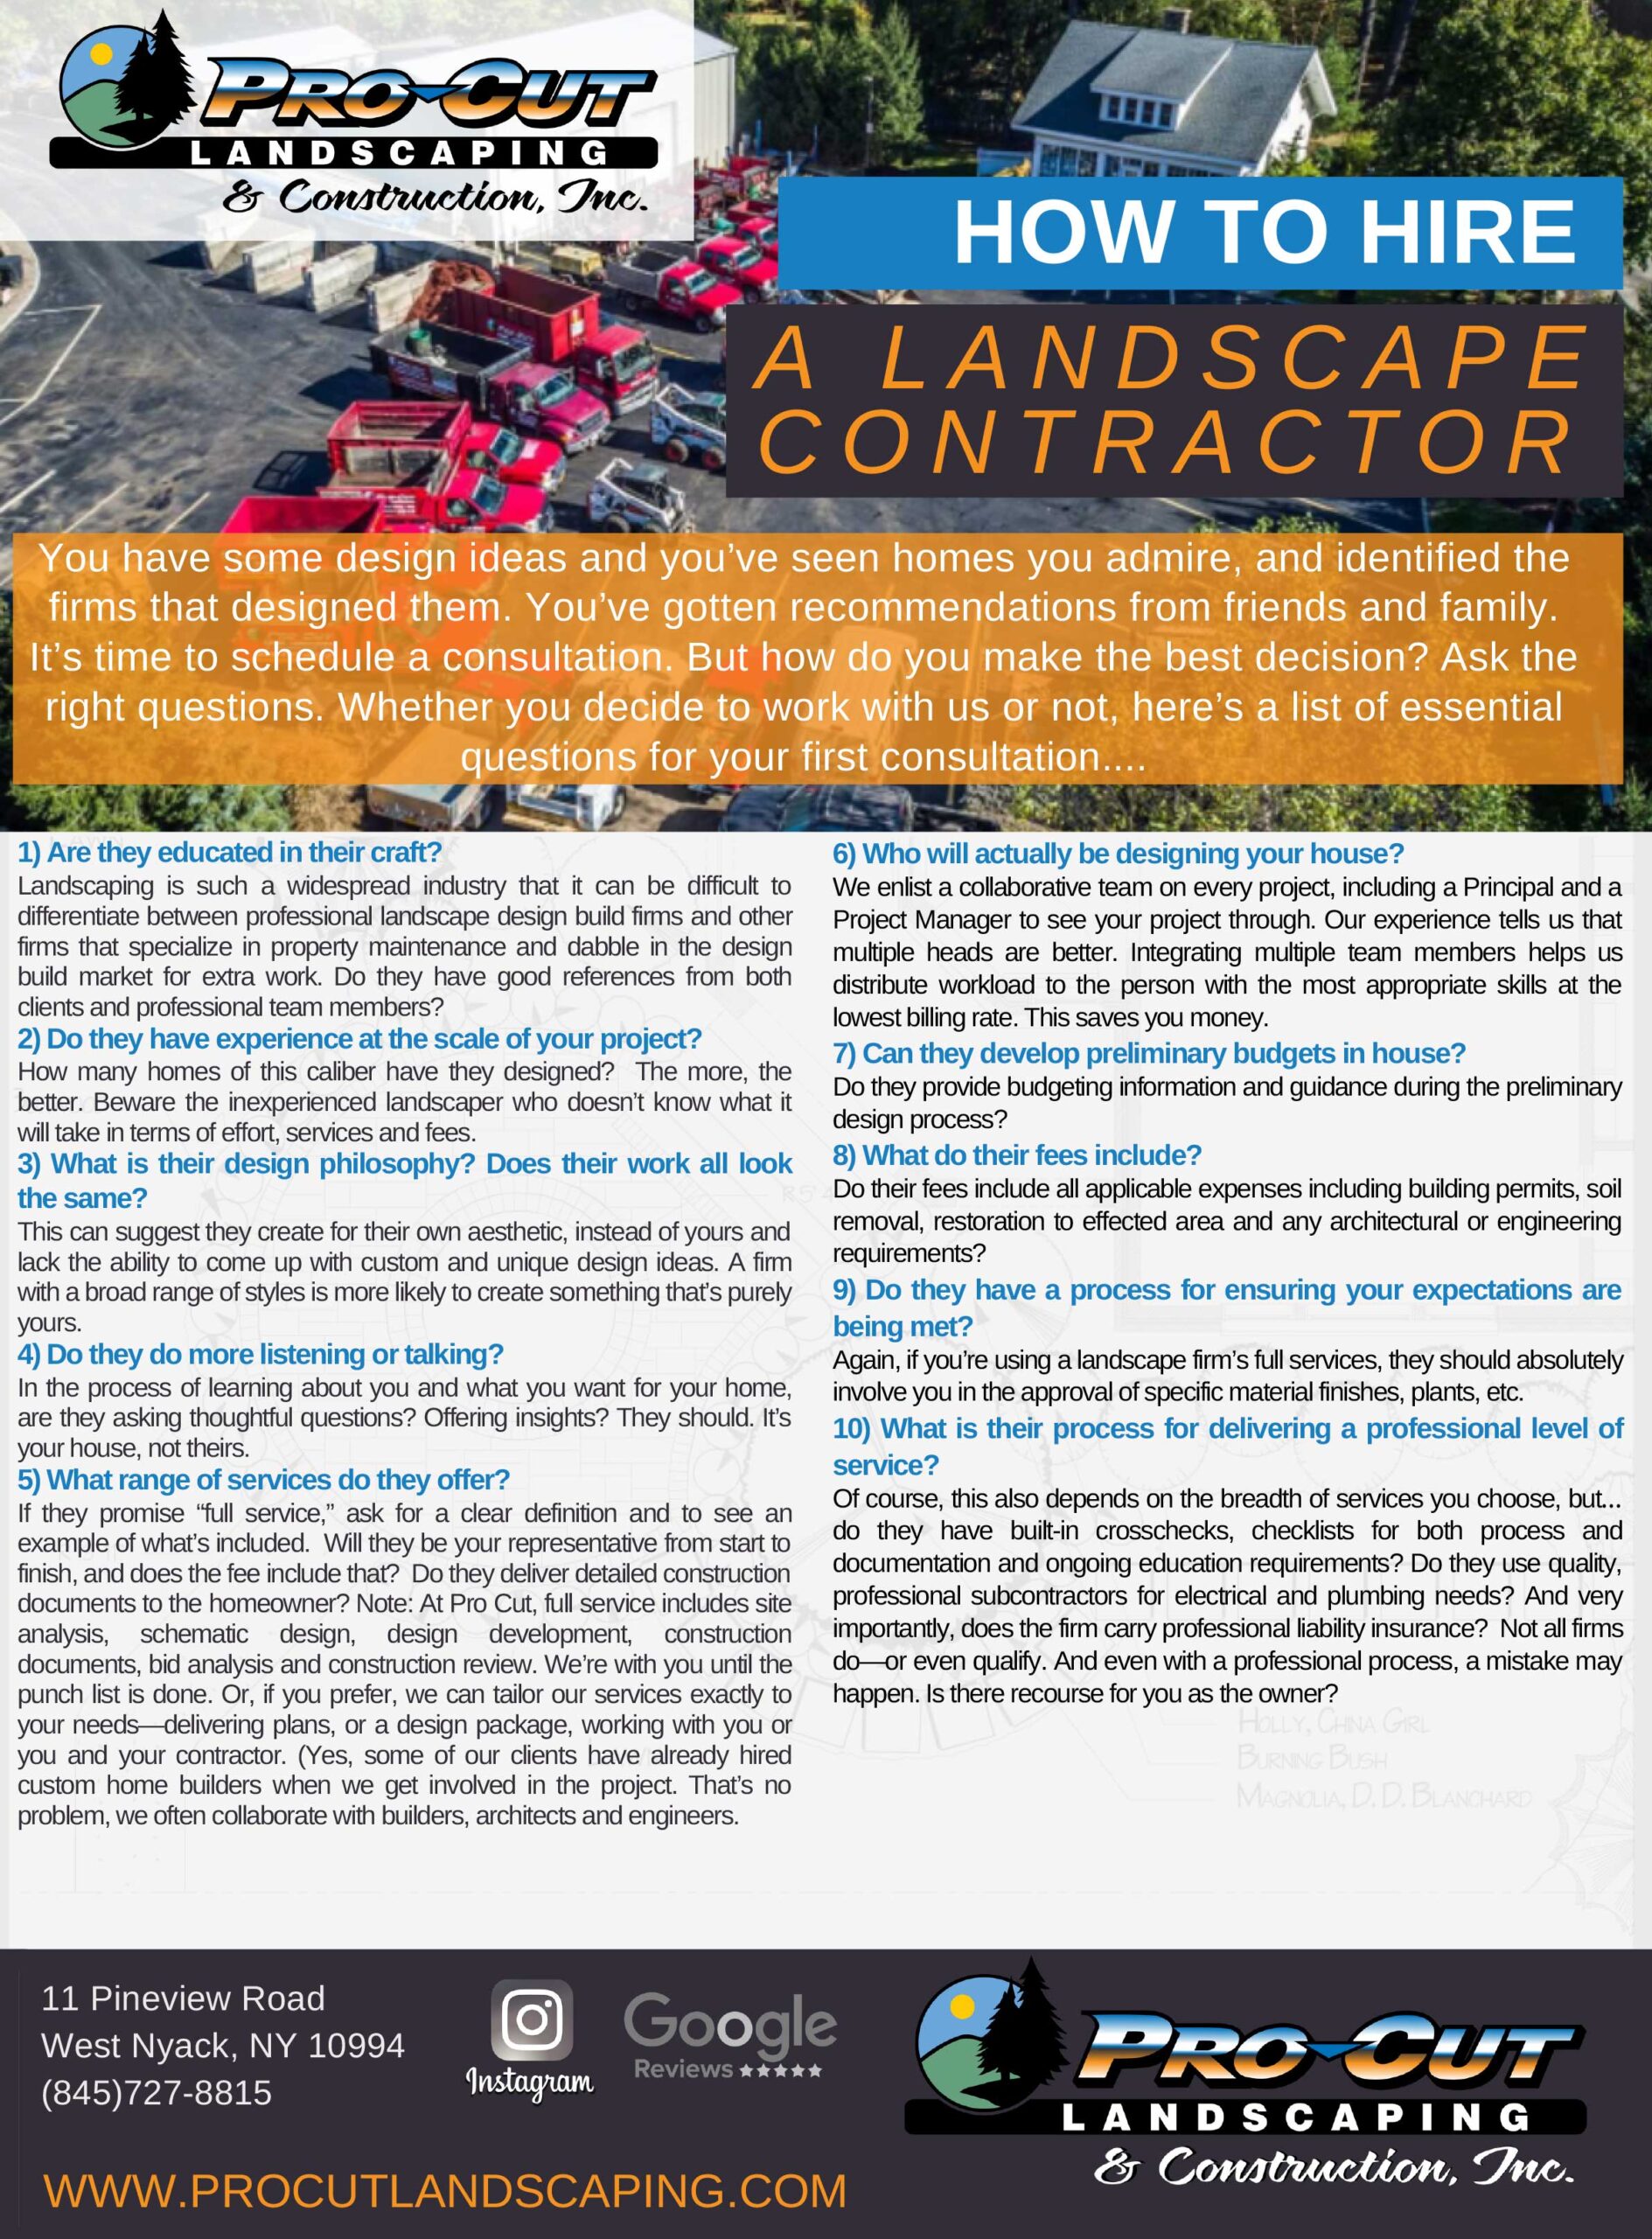 How to Hire A Landscape Contractor (PDF)